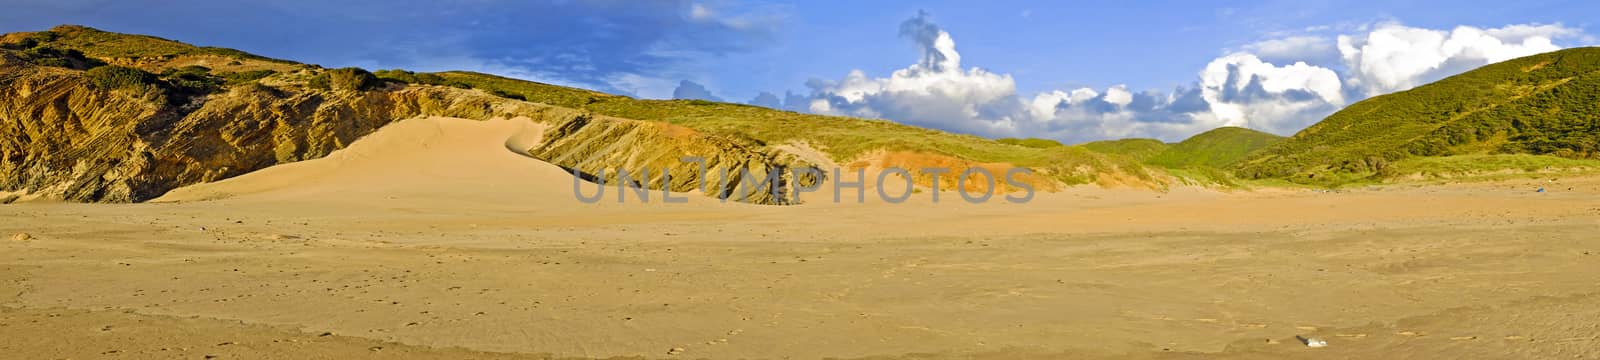 Rocks and sanddunes at Vale Figueiras in Portugal by devy